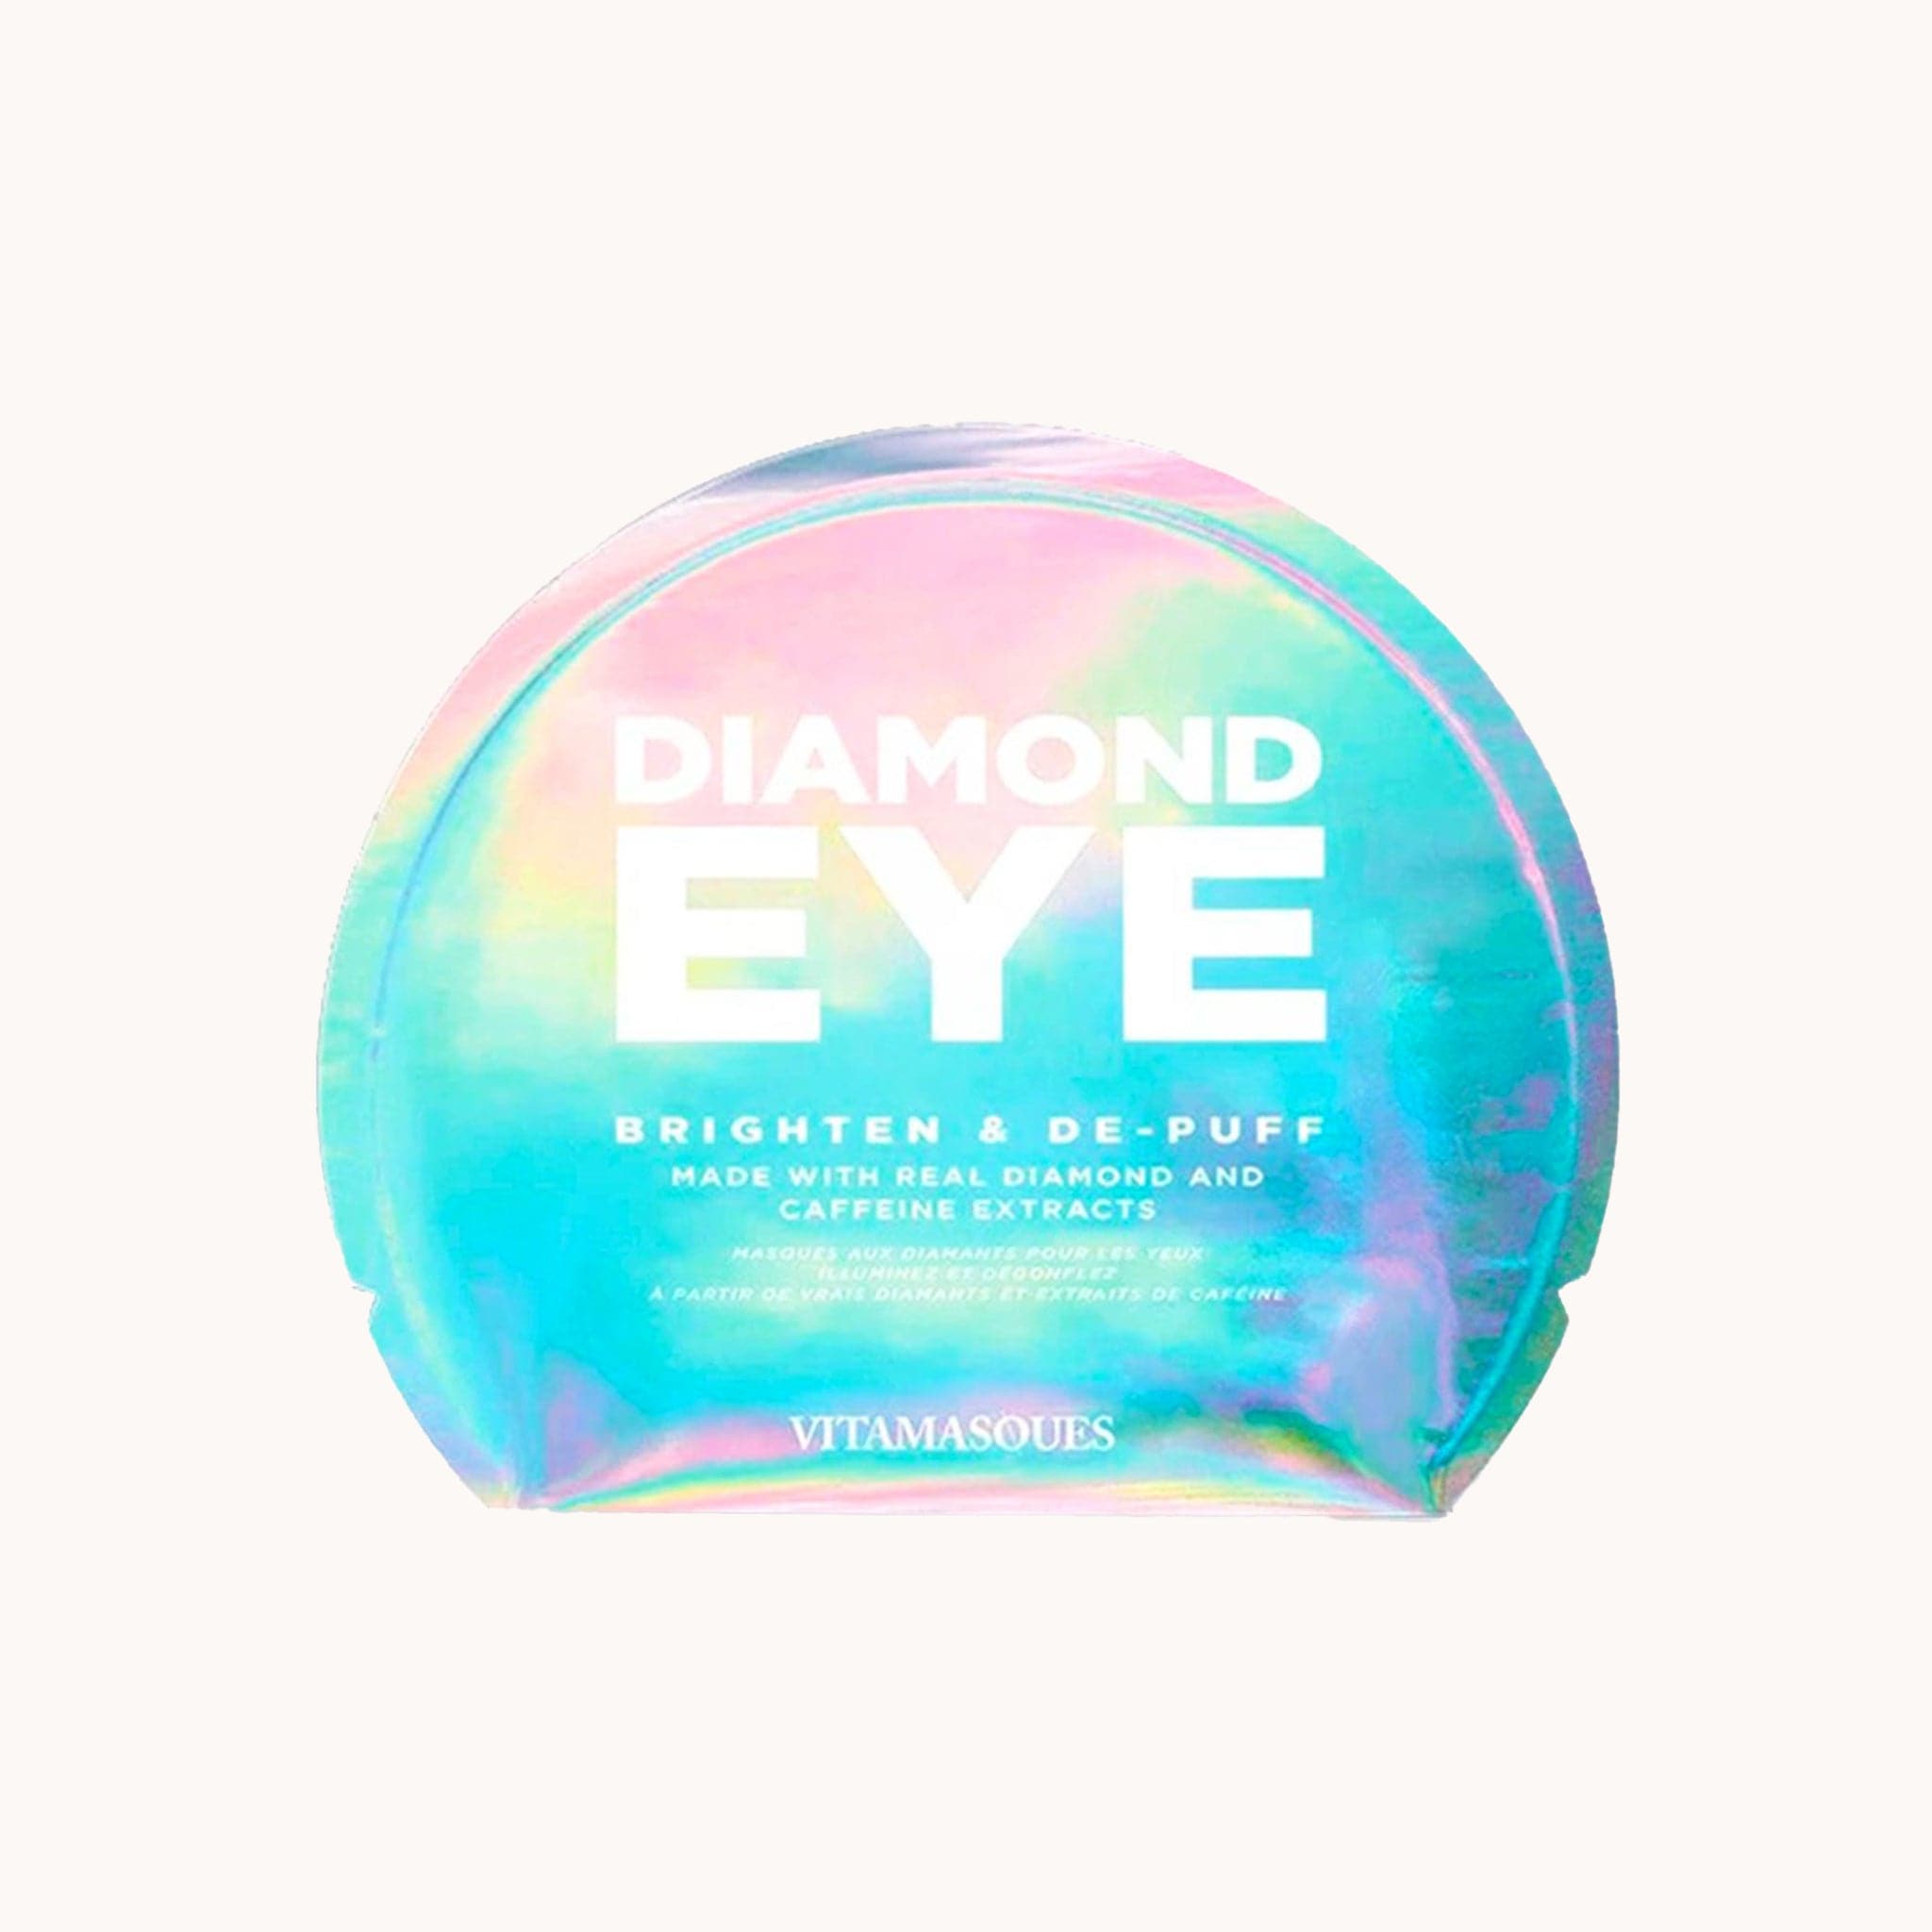 A holographic blue, green and purple packet of eye patches with white letters on the front that read, "Diamond Eye Brighten & De-Puff Made With Diamond And Caffeine Extracts".